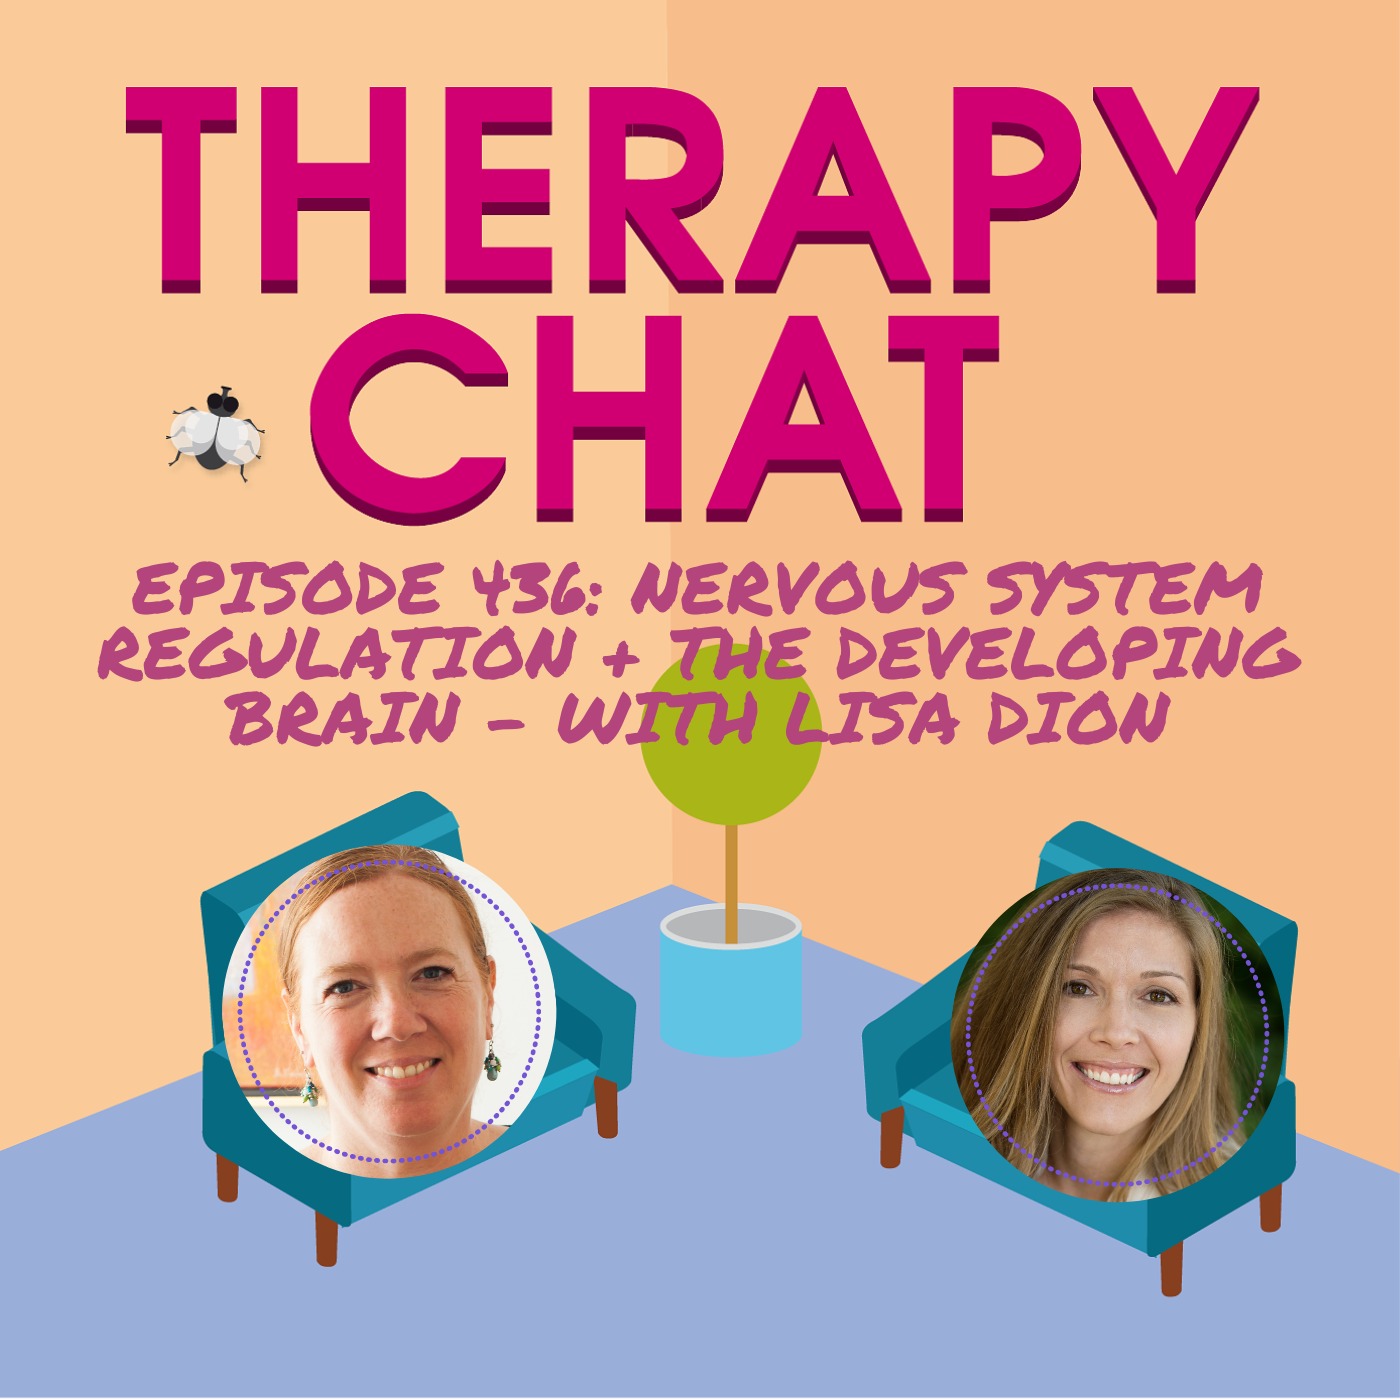 436: Nervous System Regulation + The Developing Brain - With Lisa Dion